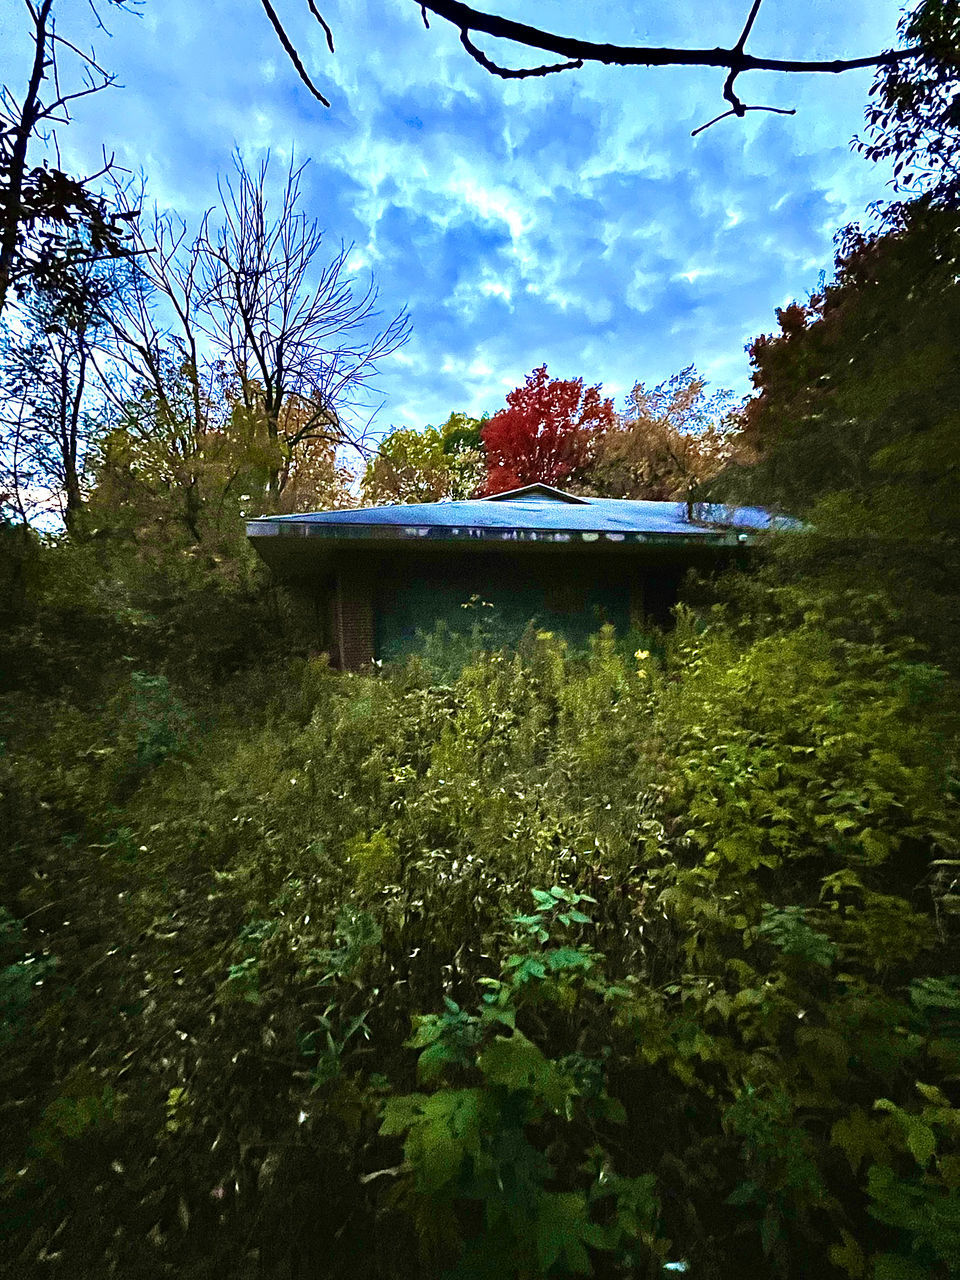 plant, nature, tree, sky, sunlight, leaf, flower, architecture, no people, built structure, reflection, cloud, green, growth, day, autumn, house, building exterior, outdoors, rural area, building, beauty in nature, grass, forest, morning, land, light, tranquility